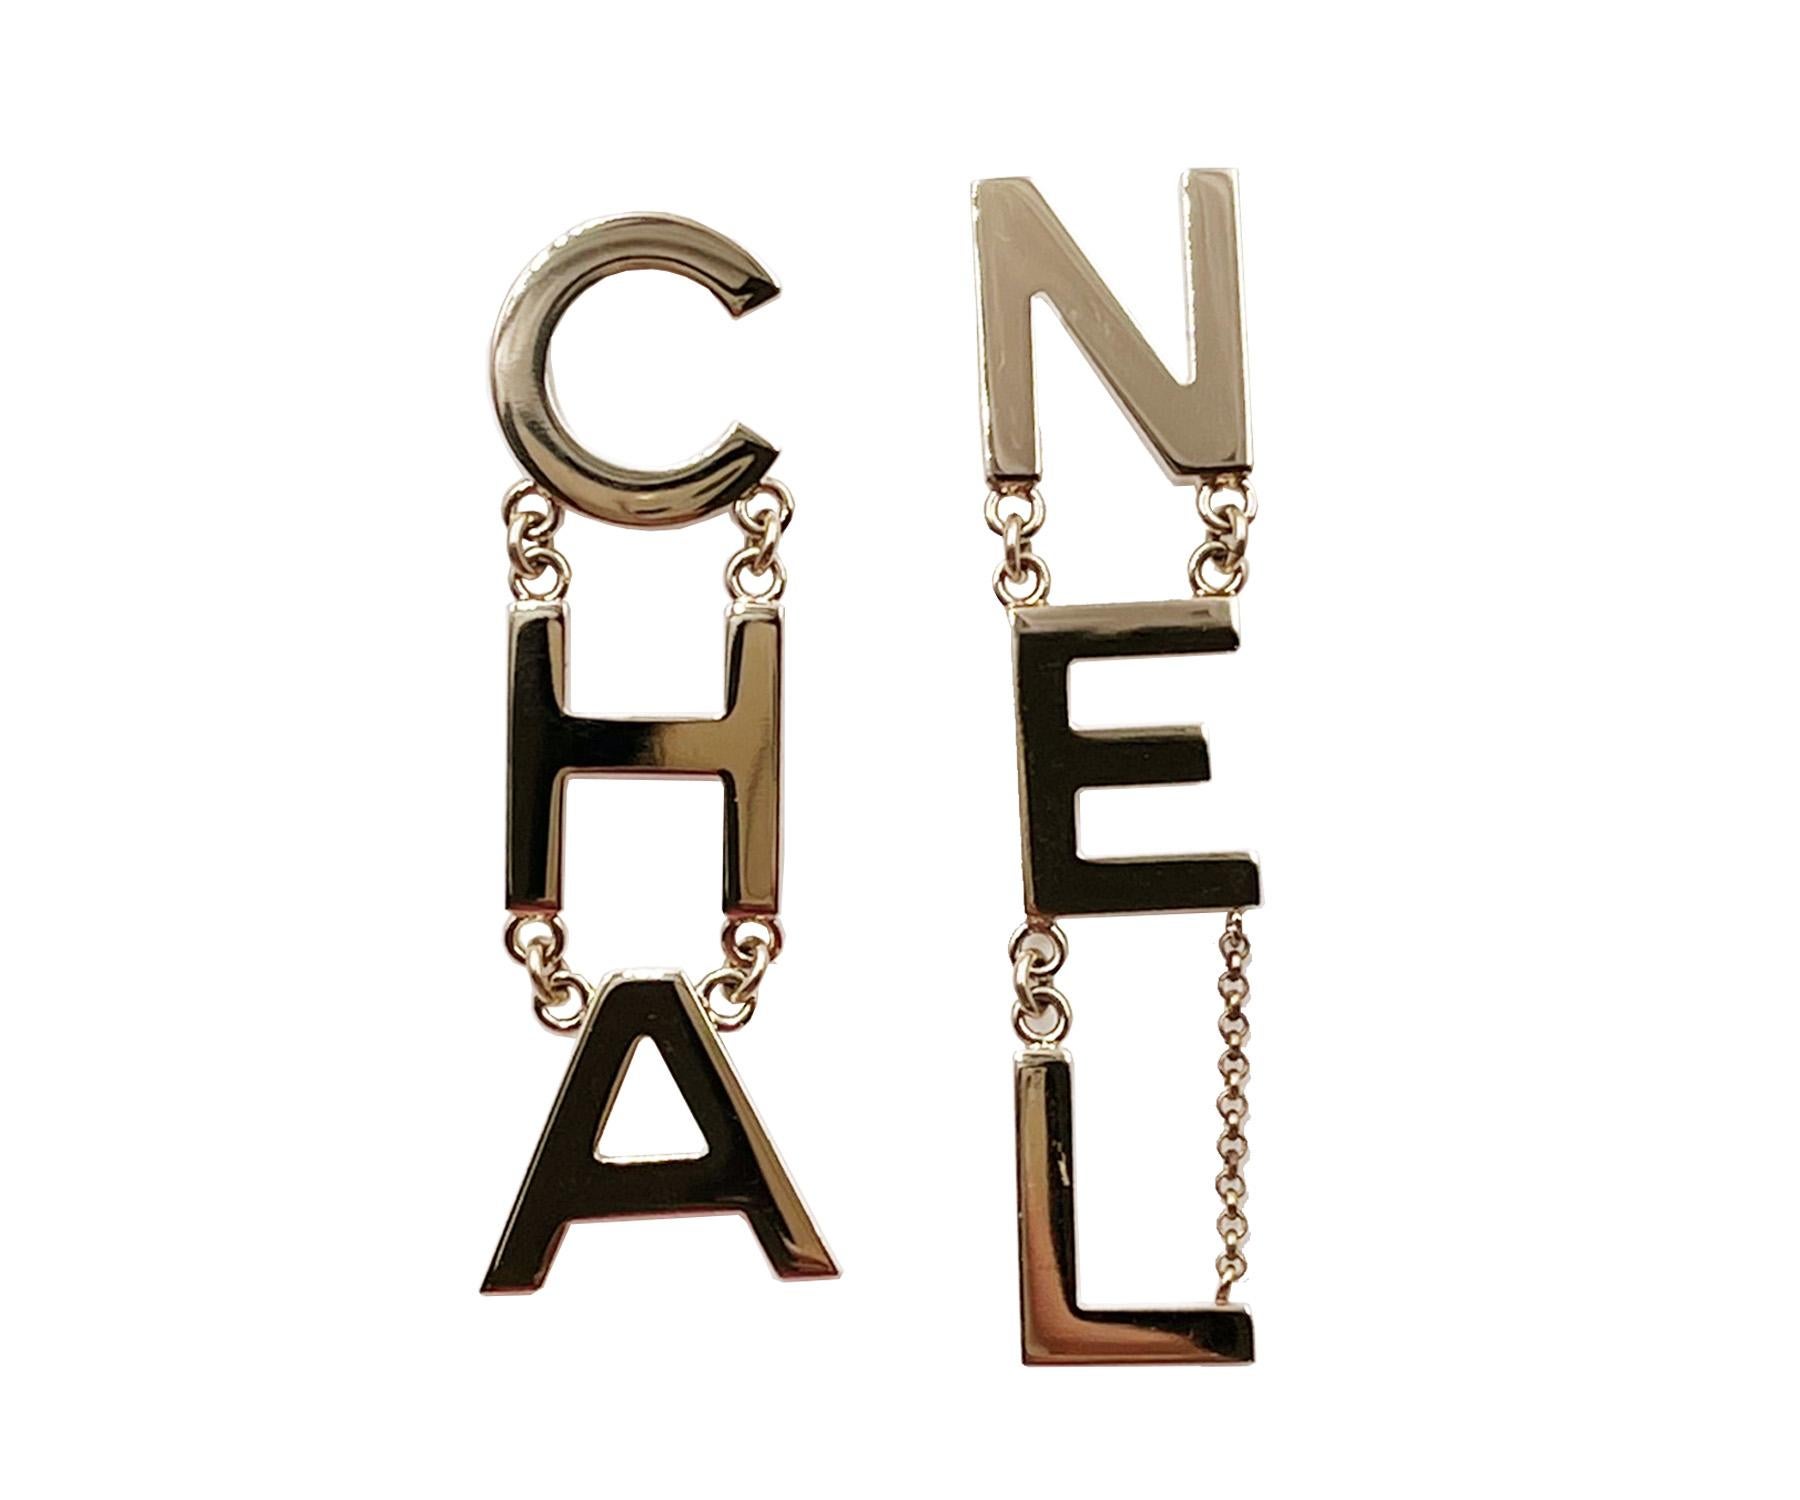 Chanel Light Gold Letter Long Piercing Earrings

* Marked 19
* Made in Italy
*Comes with original box and pouch

-It is approximately 0.7